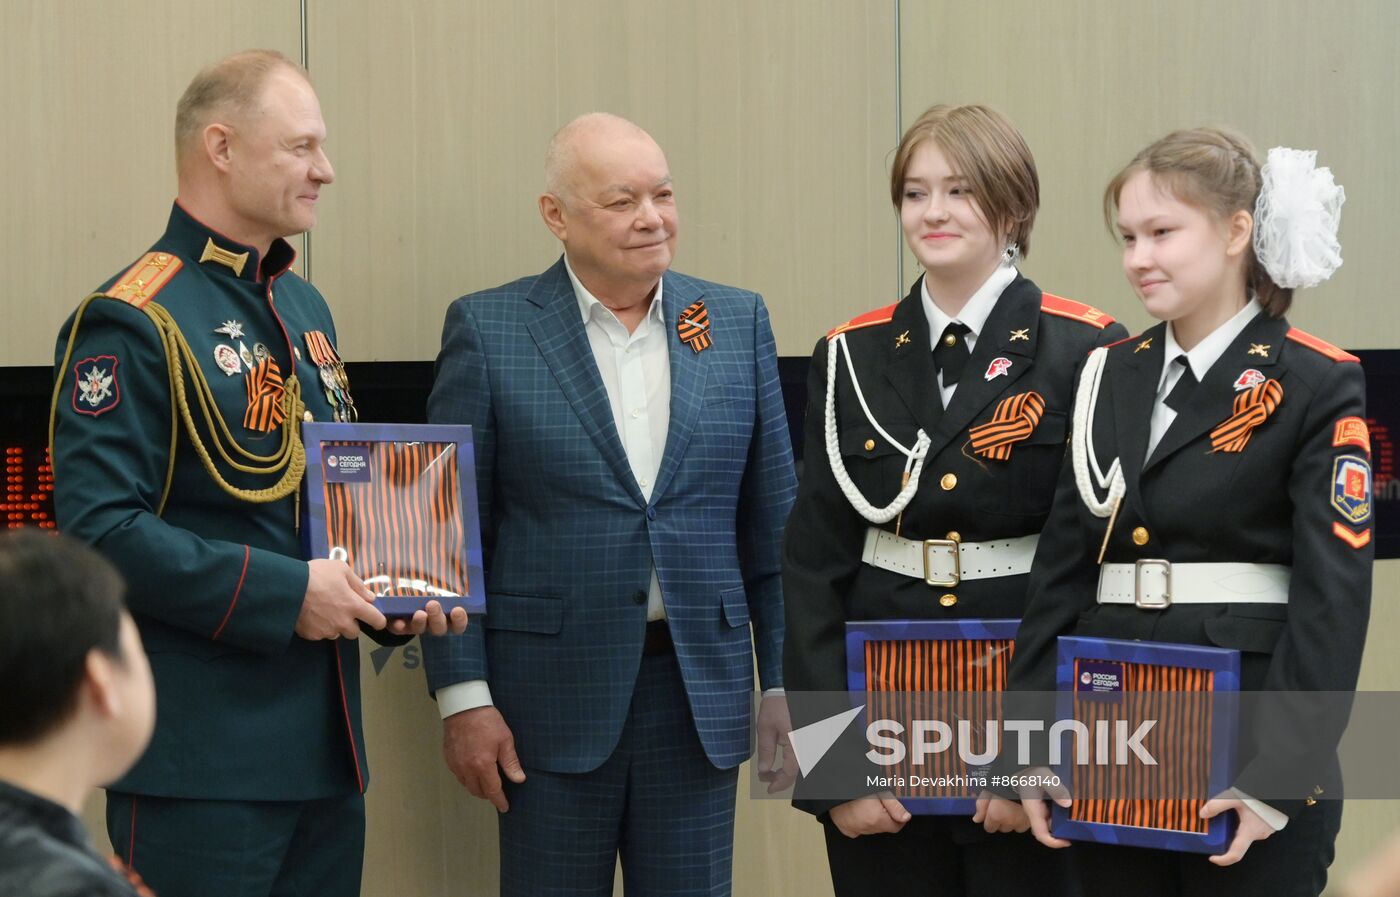 Russia St George's Ribbon Campaign News Conference